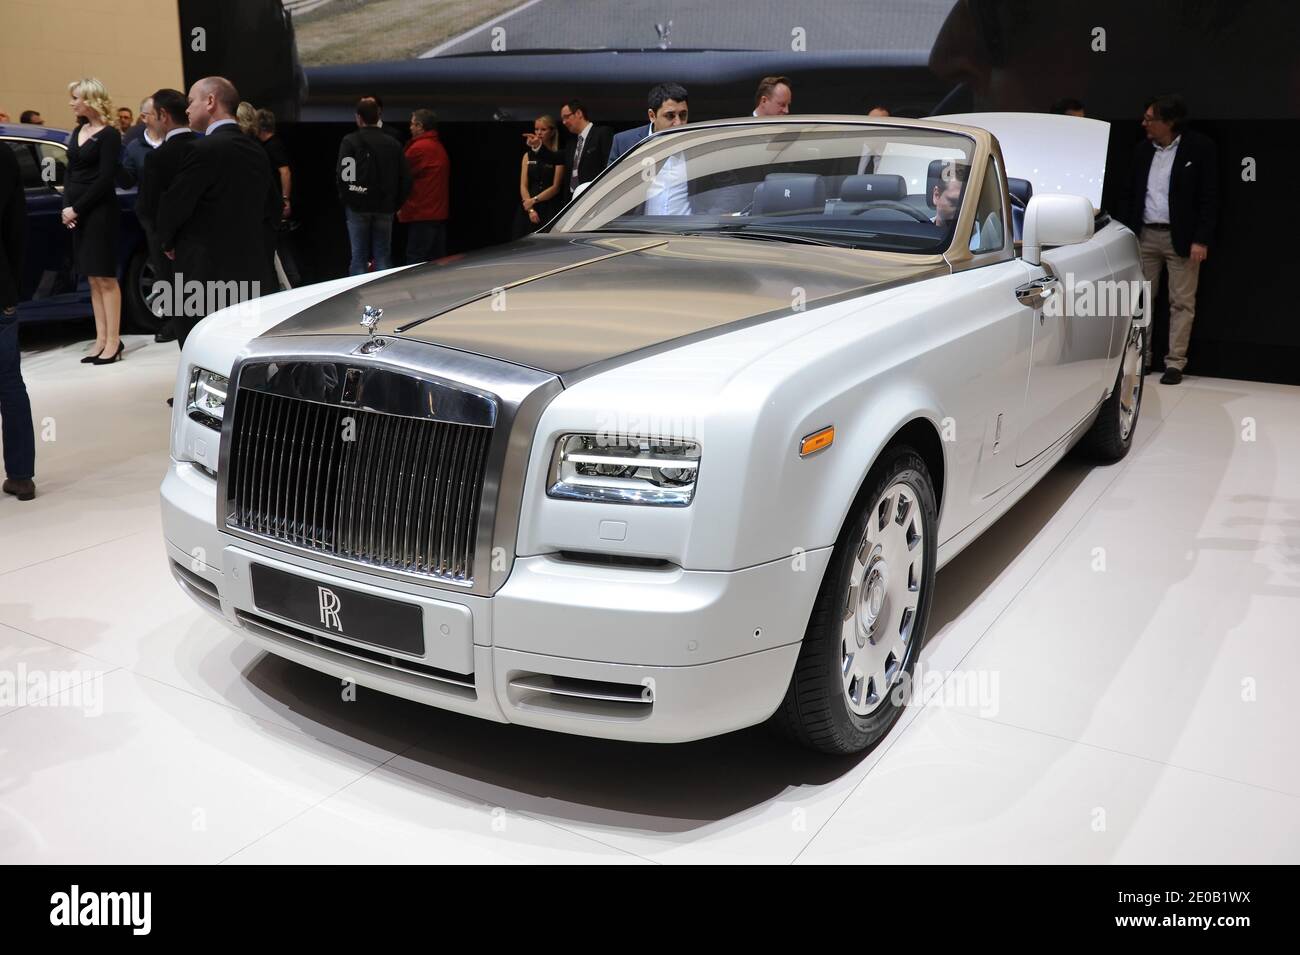 Rolls Royce Phantom Coupe on display at the 82nd International Motor Show  and Accessories of Geneva, Switzerland on March 7, 2012. Photo by  Loona/ABACAPRESS.COM Stock Photo - Alamy